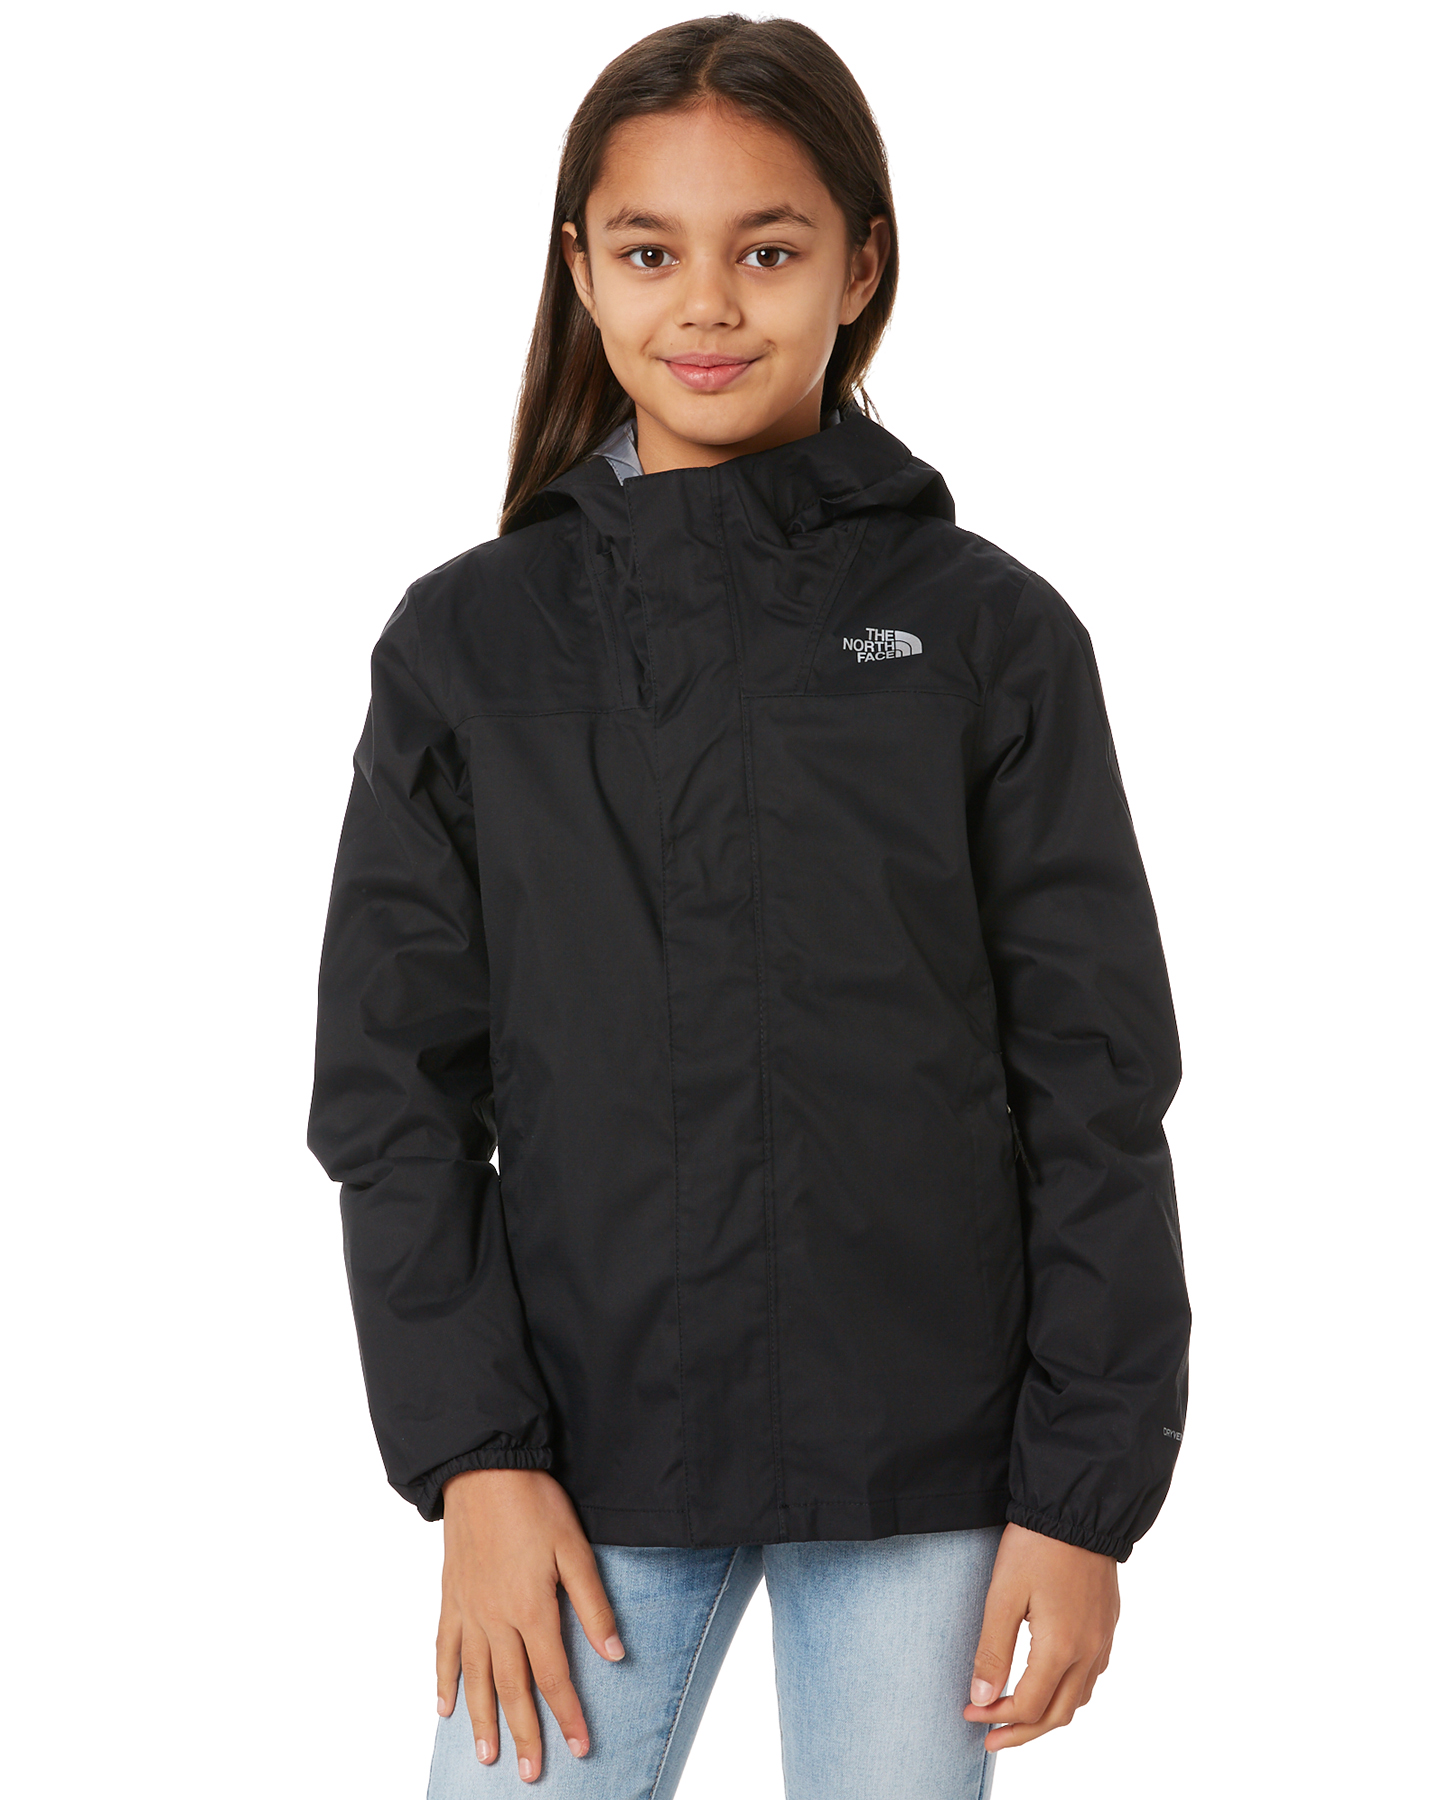 The North Face Youth Girls Resolve Reflective Jacket White Tribal Geo